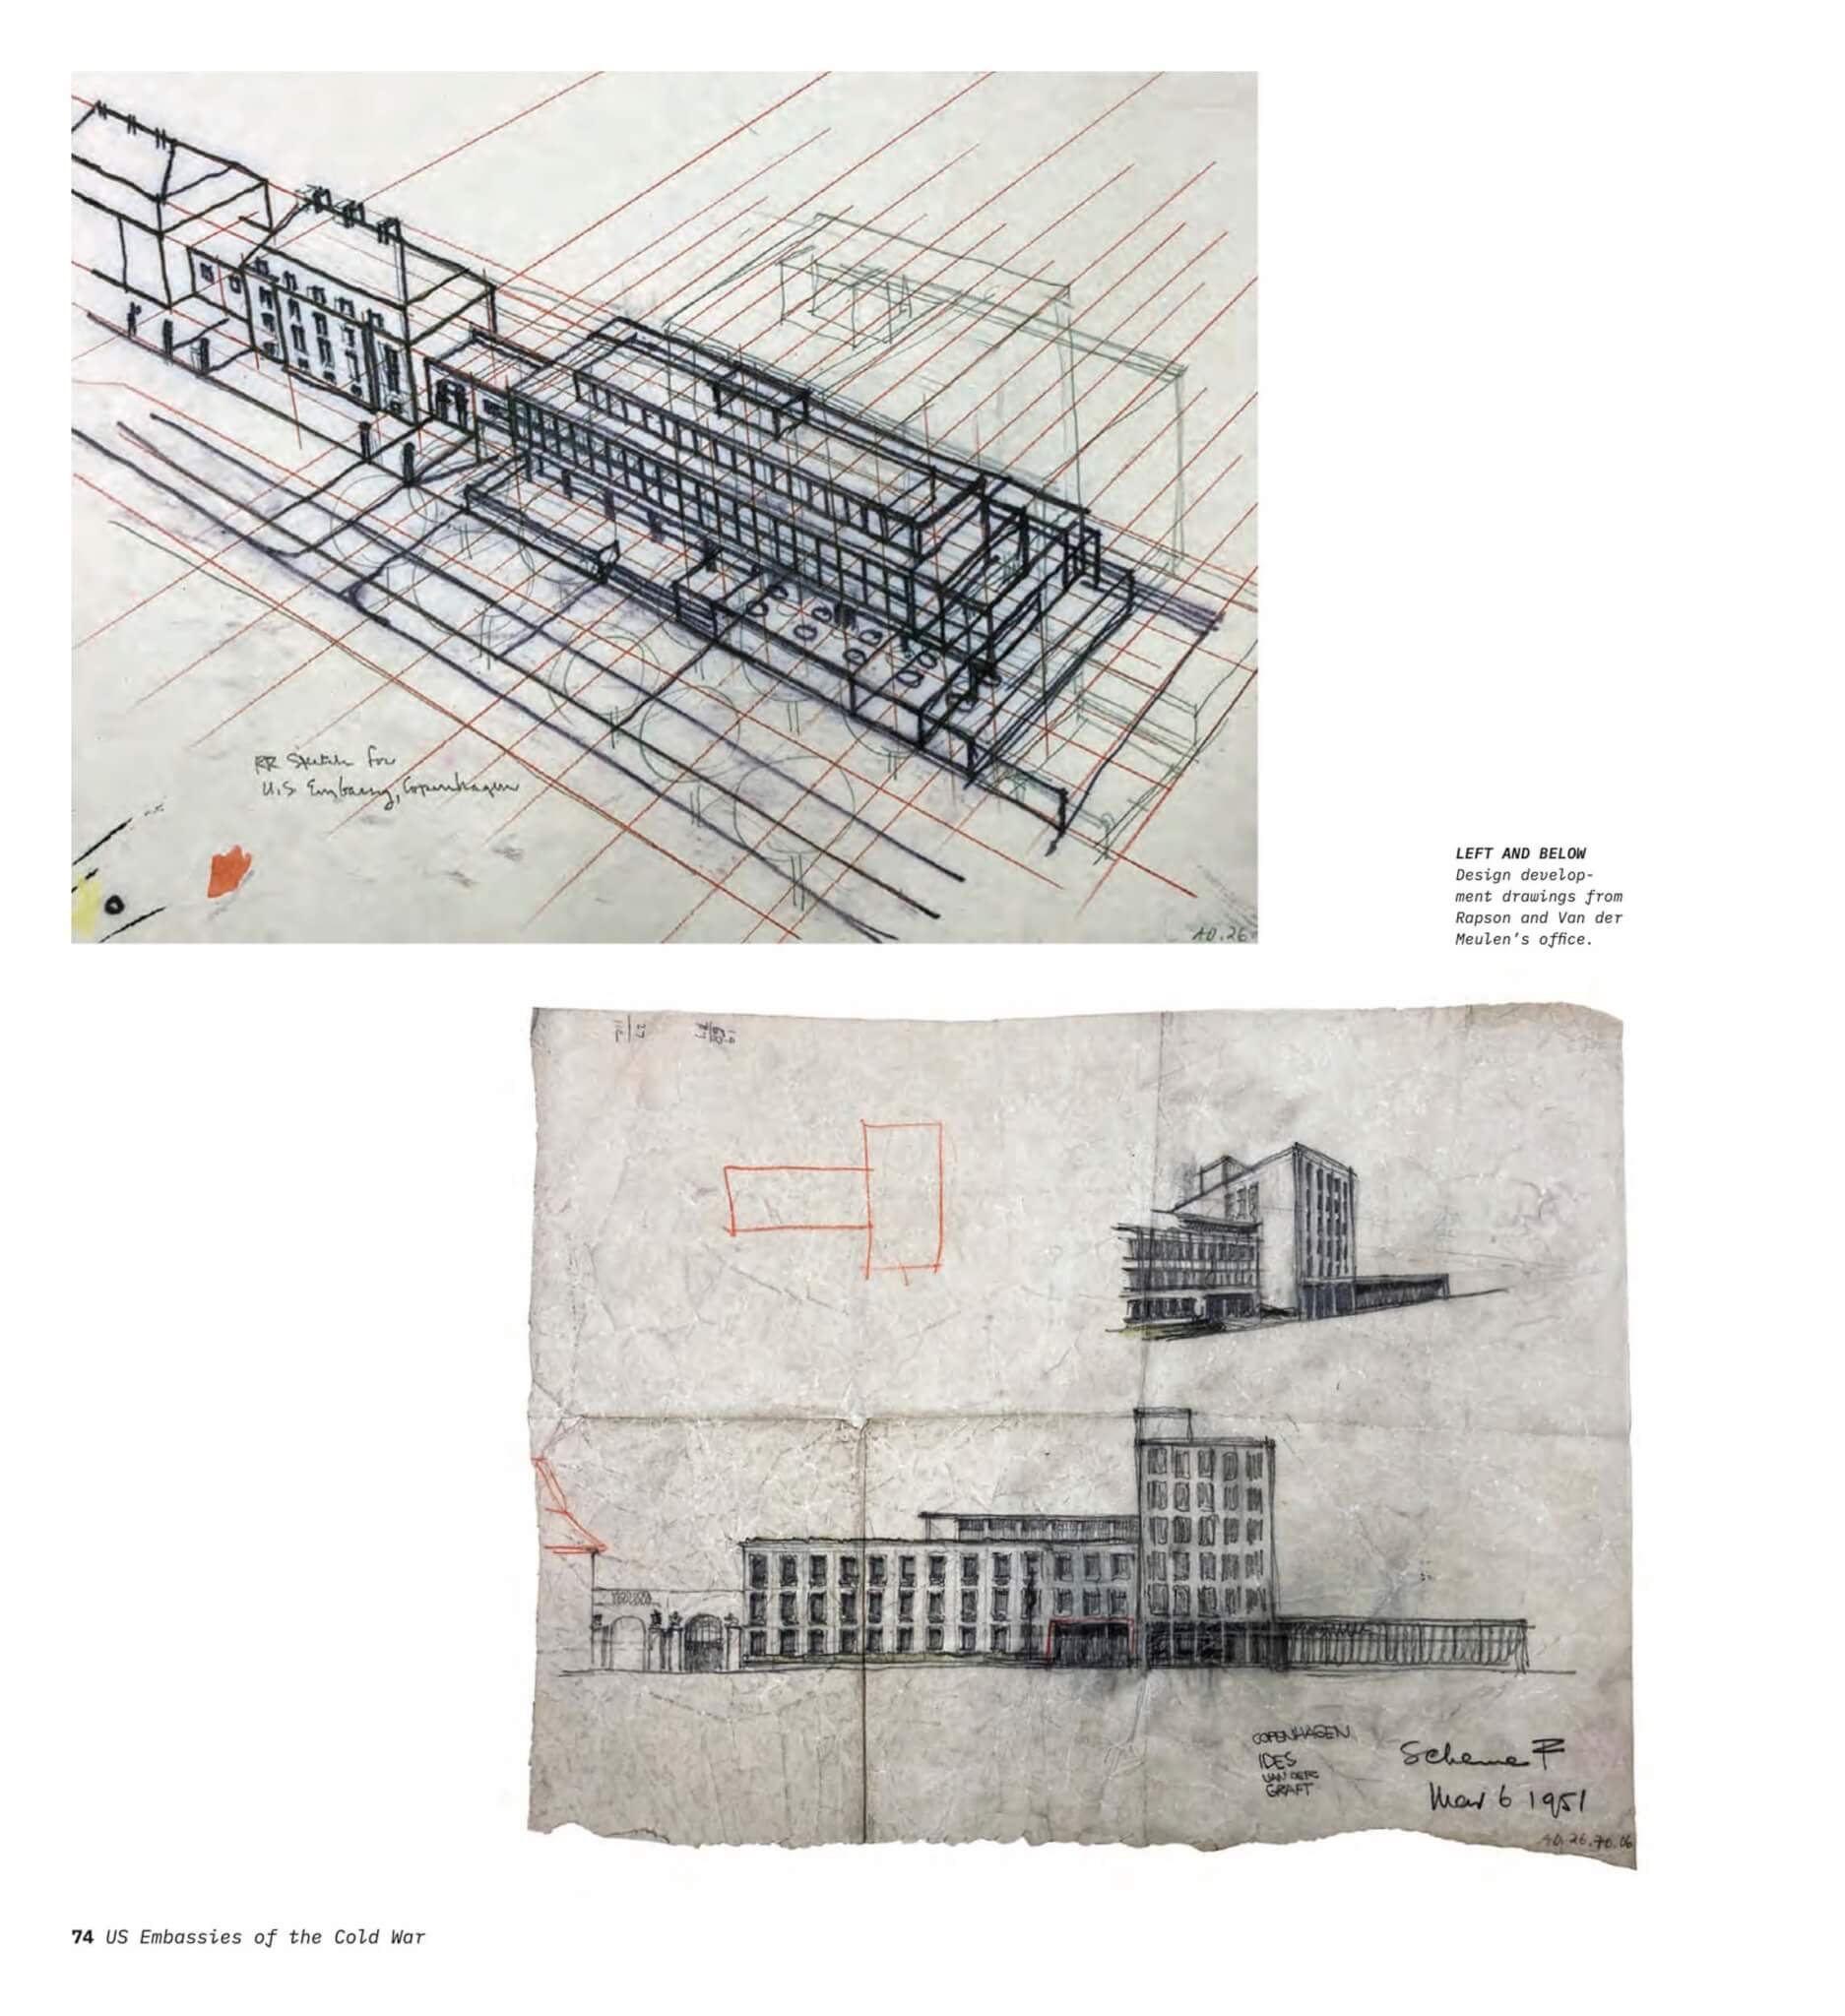 Design development drawings of the US Embassy in Copenhagen from Rapson and Van der Meulens office Courtesy of the Cranbrook Archives c. 1951